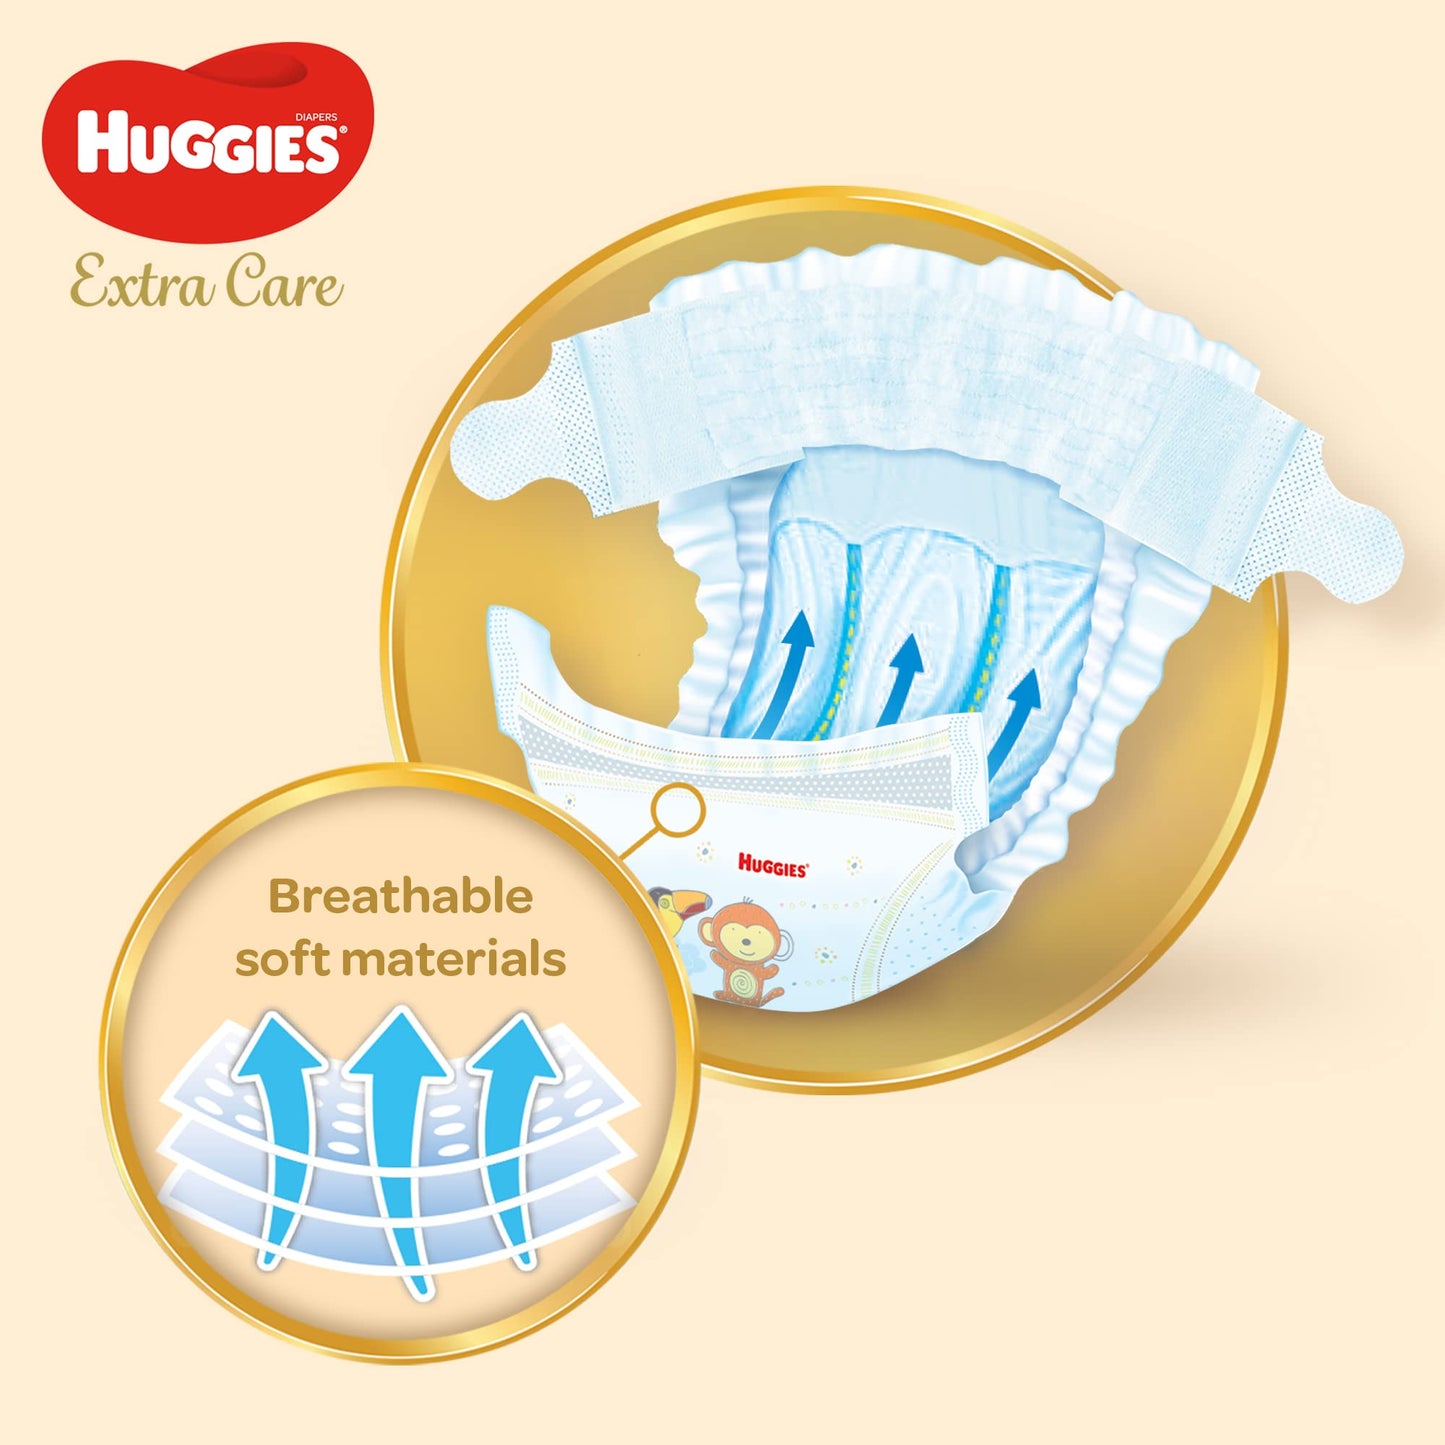 Huggies,Extra Care Baby Diapers,Diapers Size 3(4-9kg),Mega Pack of 152 Diapers,Absorbent Channels and Strechy Waistband,12h Day & Night Protection,Free from Nasties